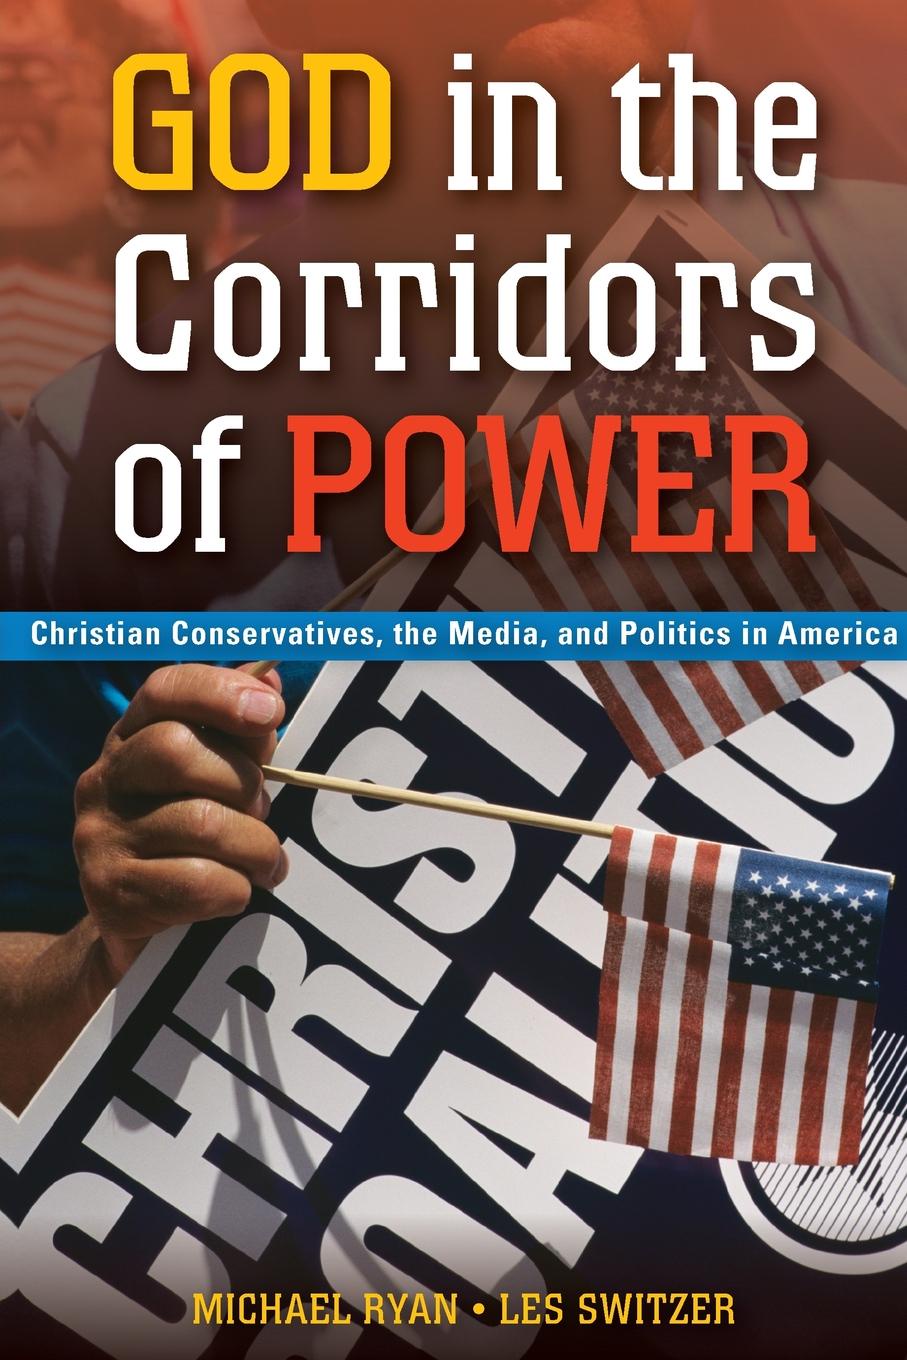 God in the Corridors of Power. Christian Conservatives, the Media, and Politics in America